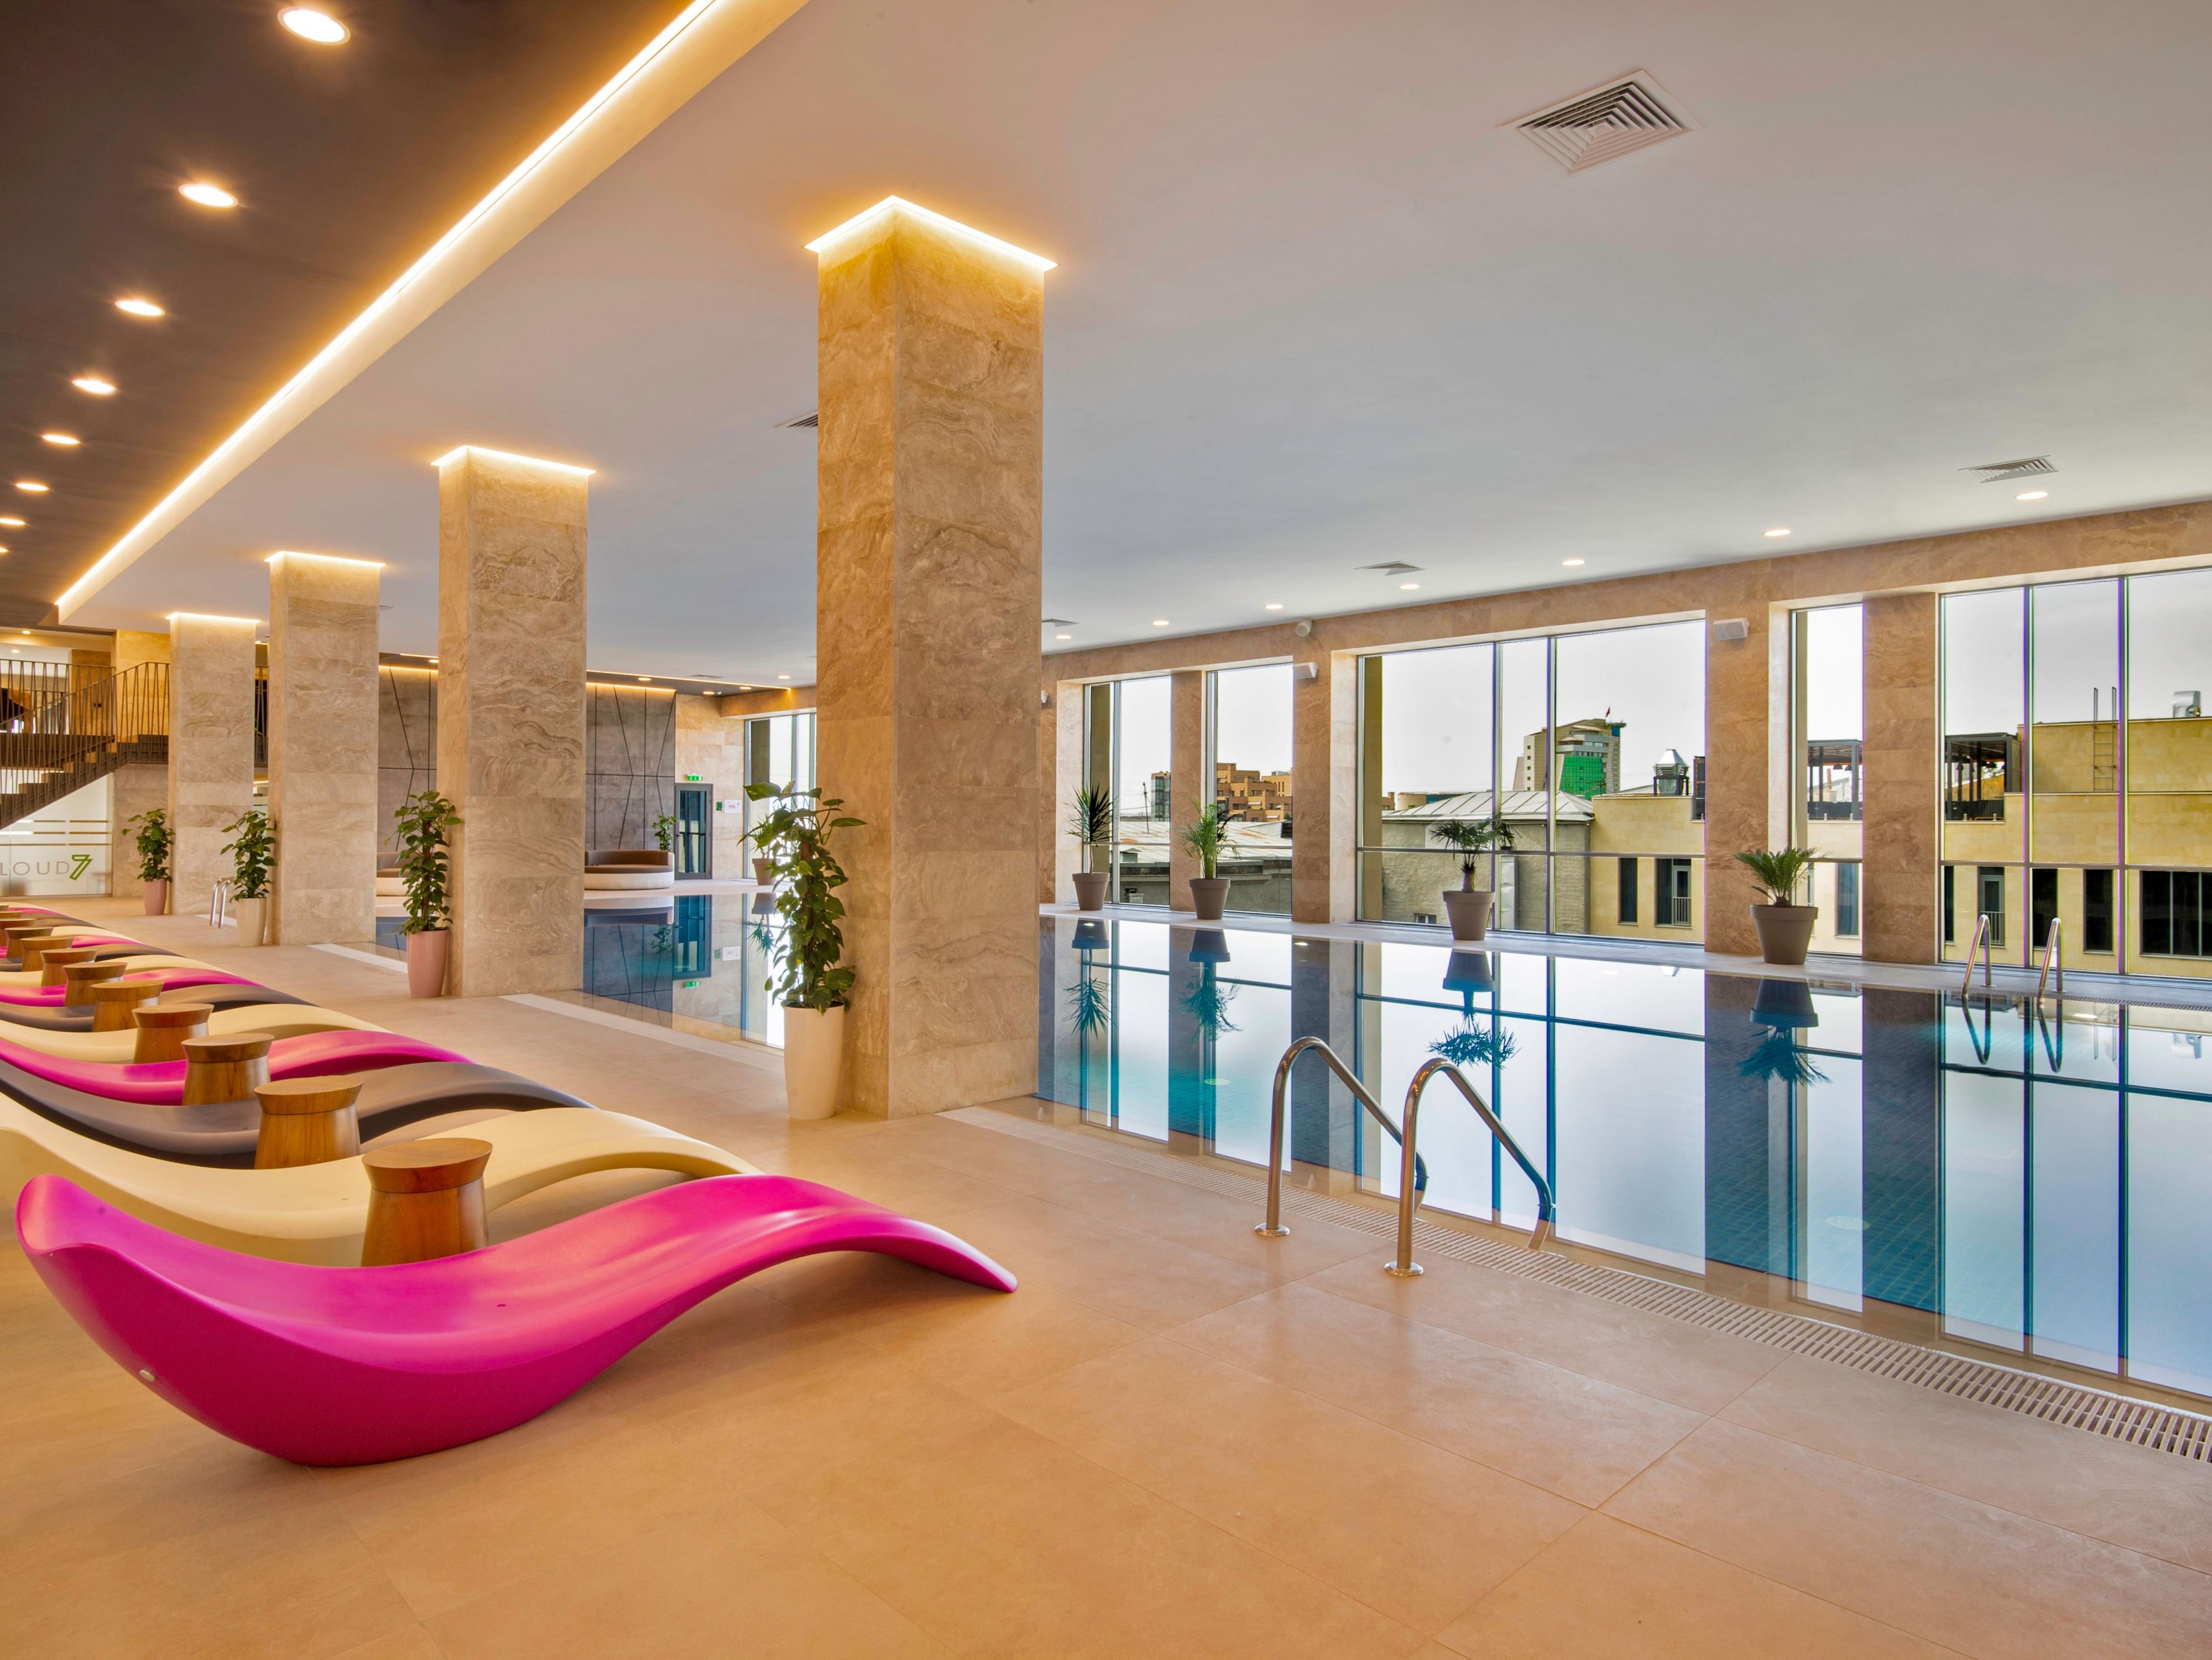 Discover our extensive recreation facilities in the "Cloud 7" Wellness and Fitness Hub. Located on the seventh floor, the “Cloud 7” SPA & Fitness area is almost 1,500 square metres and has a 25-metre pool, massage rooms, beauty treatments, a wide array of fitness equipment along with a whirlpool spa, sauna, hammam, and a salt room.